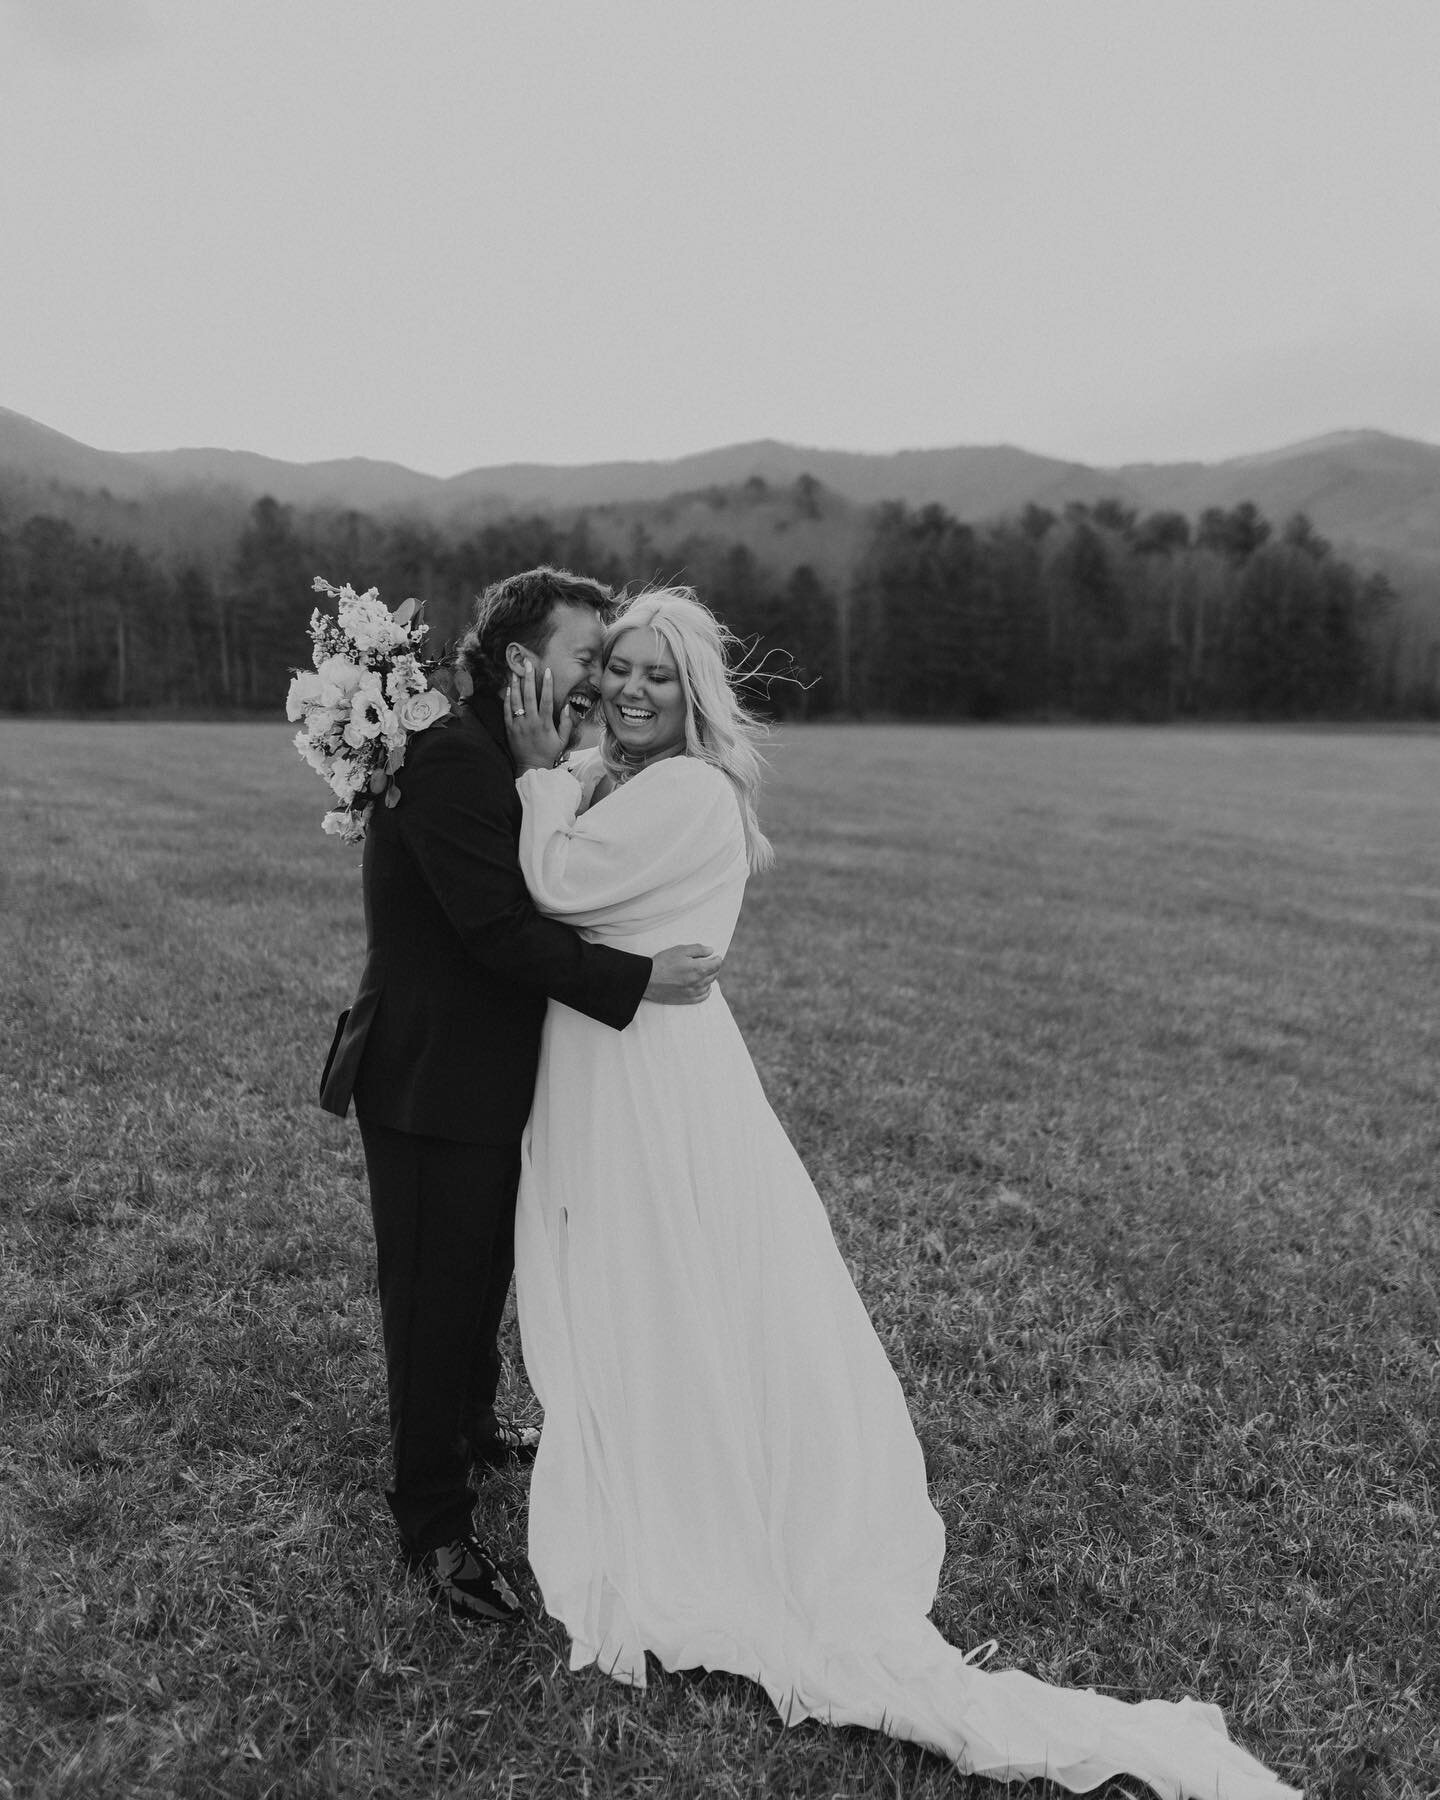 H + C. 

I couldn&rsquo;t even get them done in color without posting a little sneak peek of this dreamy couple &mdash; 🖤

Obsessing over black + white wedding portraits, The Shiloh &amp;&amp; Haley and Cody. 

photographer: @hunterleighphoto 
venue